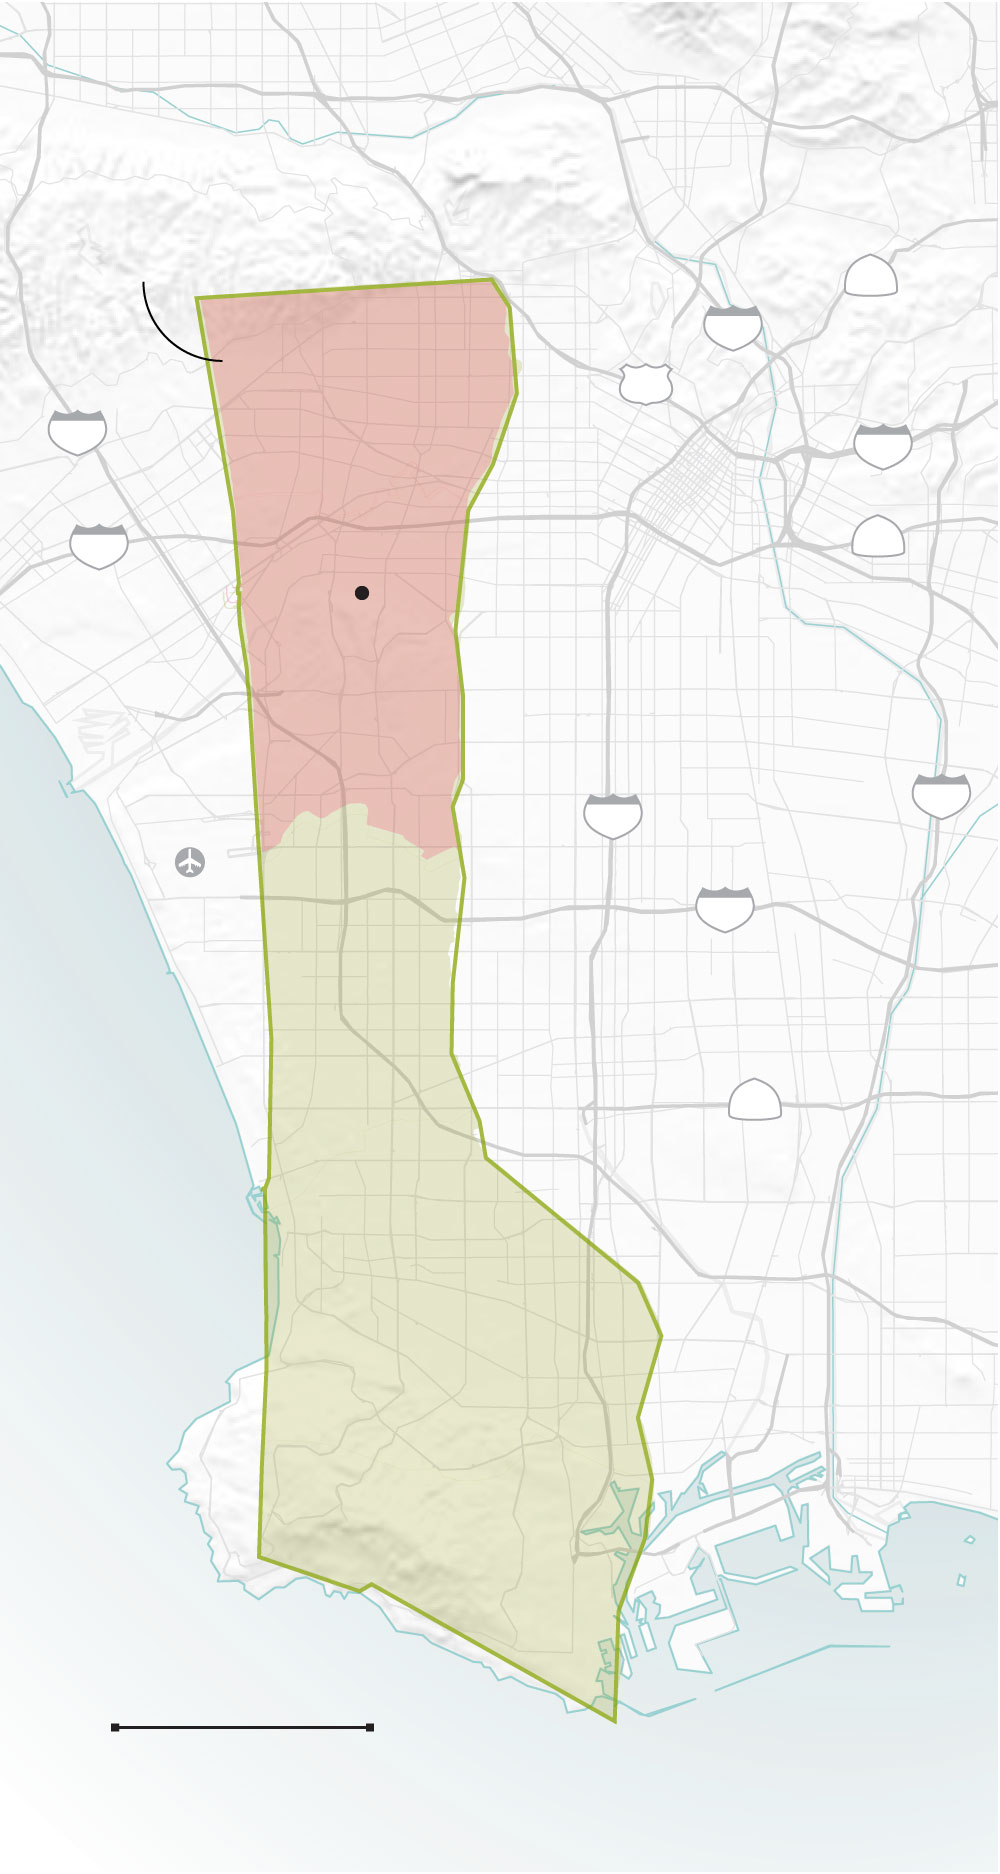 Map shows the evacuation area in Gaza Strip overlaid on the Los Angeles area for scale.